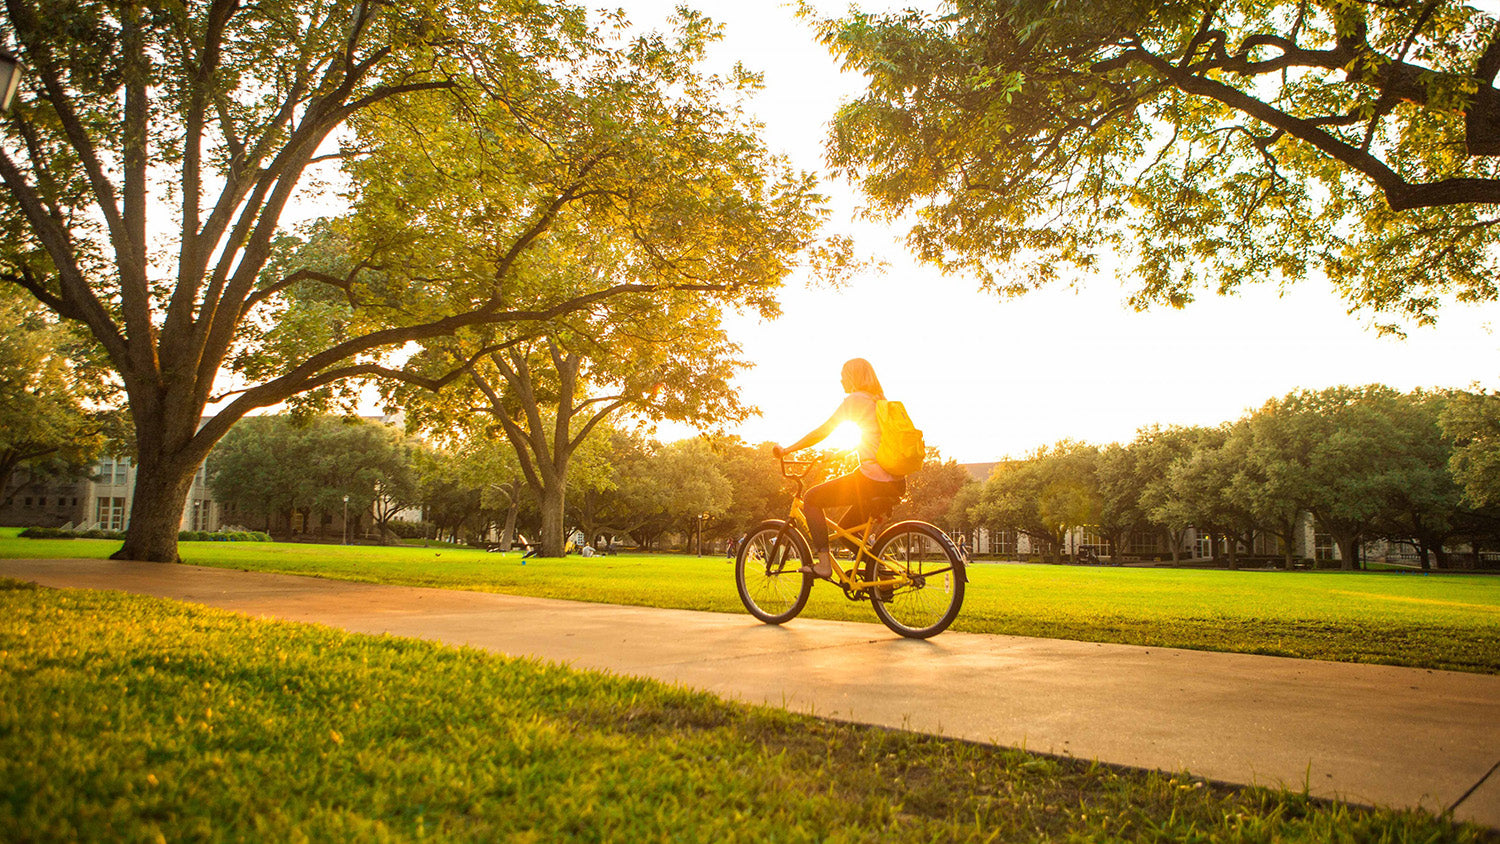 This photos shows a college student riding a pirate bike on Southwestern Universities Campus at sunset. They are riding by a green field with trees in the background. 